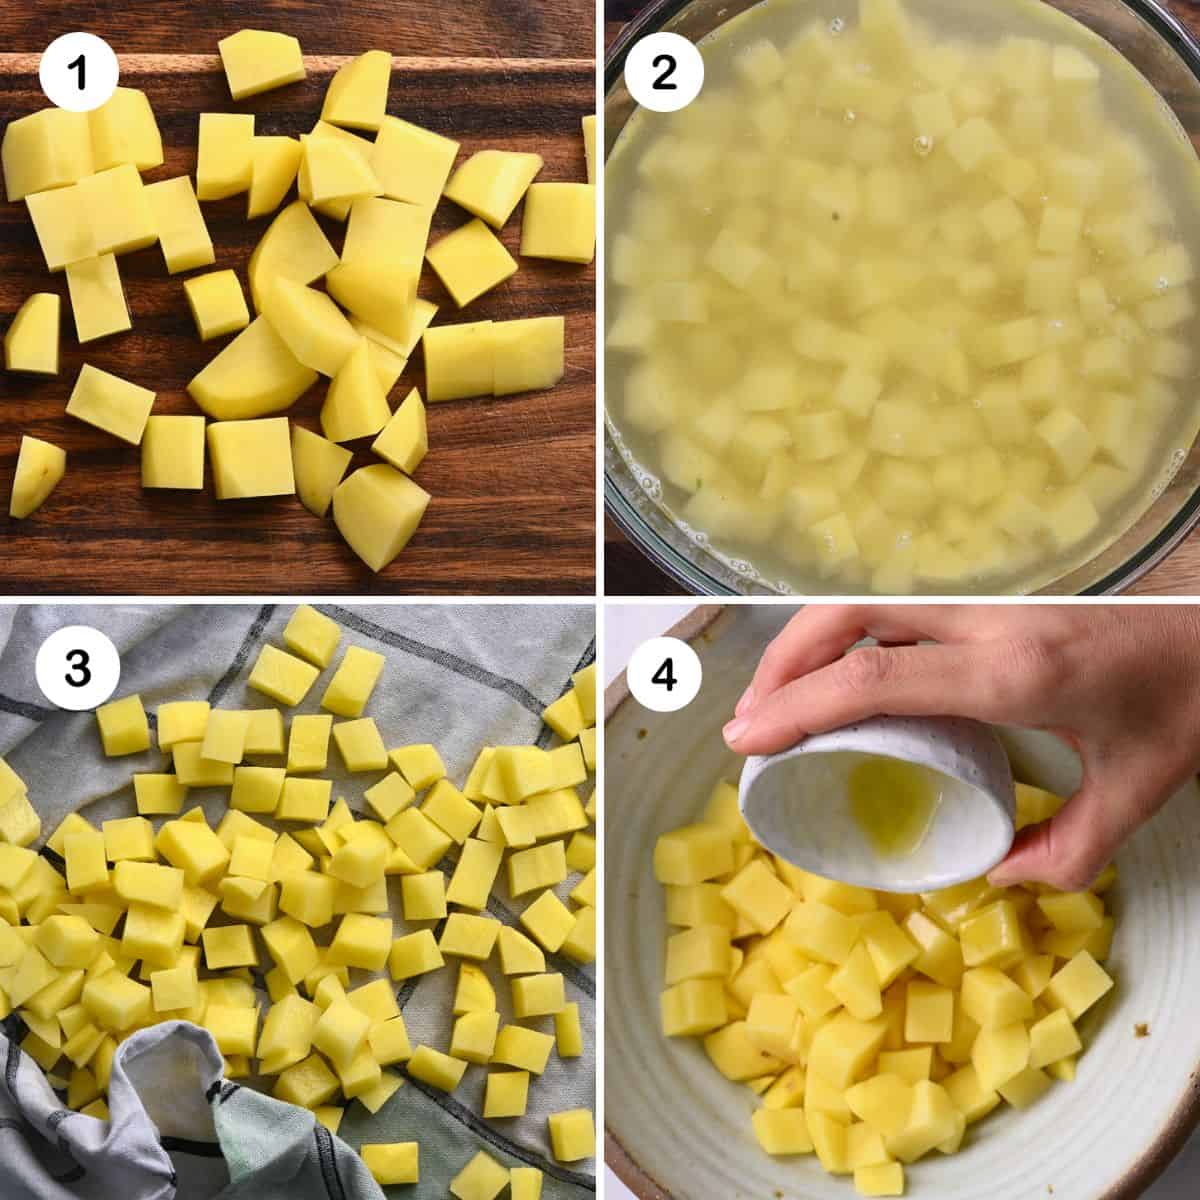 Steps for chopping and seasoning potatoes for frying